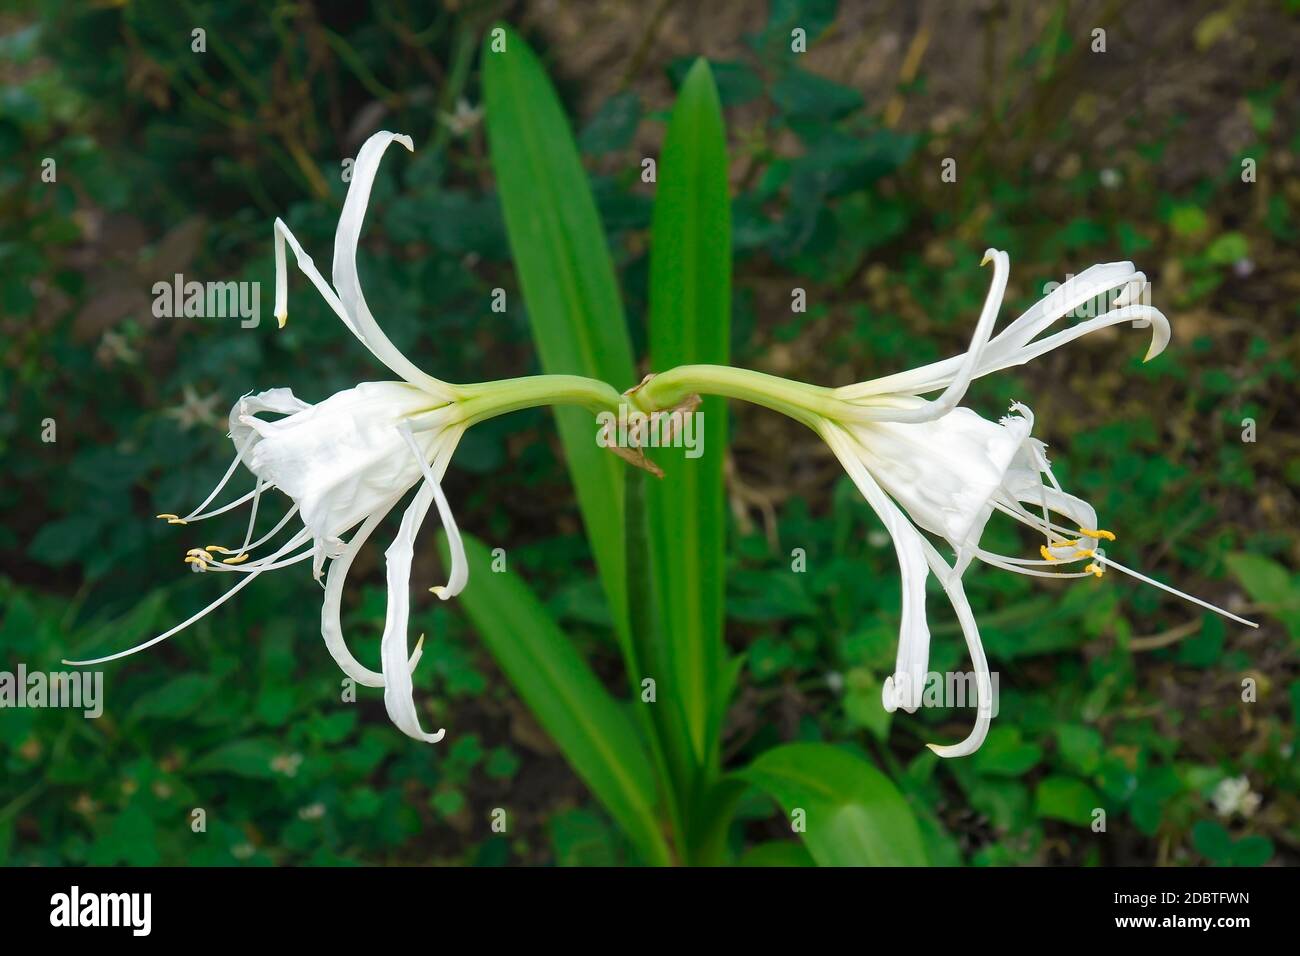 Peruvian daffodil (Ismene x deflexa). Called Basket lily, Spider lily, Summer daffodil and Sea daffodil also. Another scientific name is Hymenocallis Stock Photo